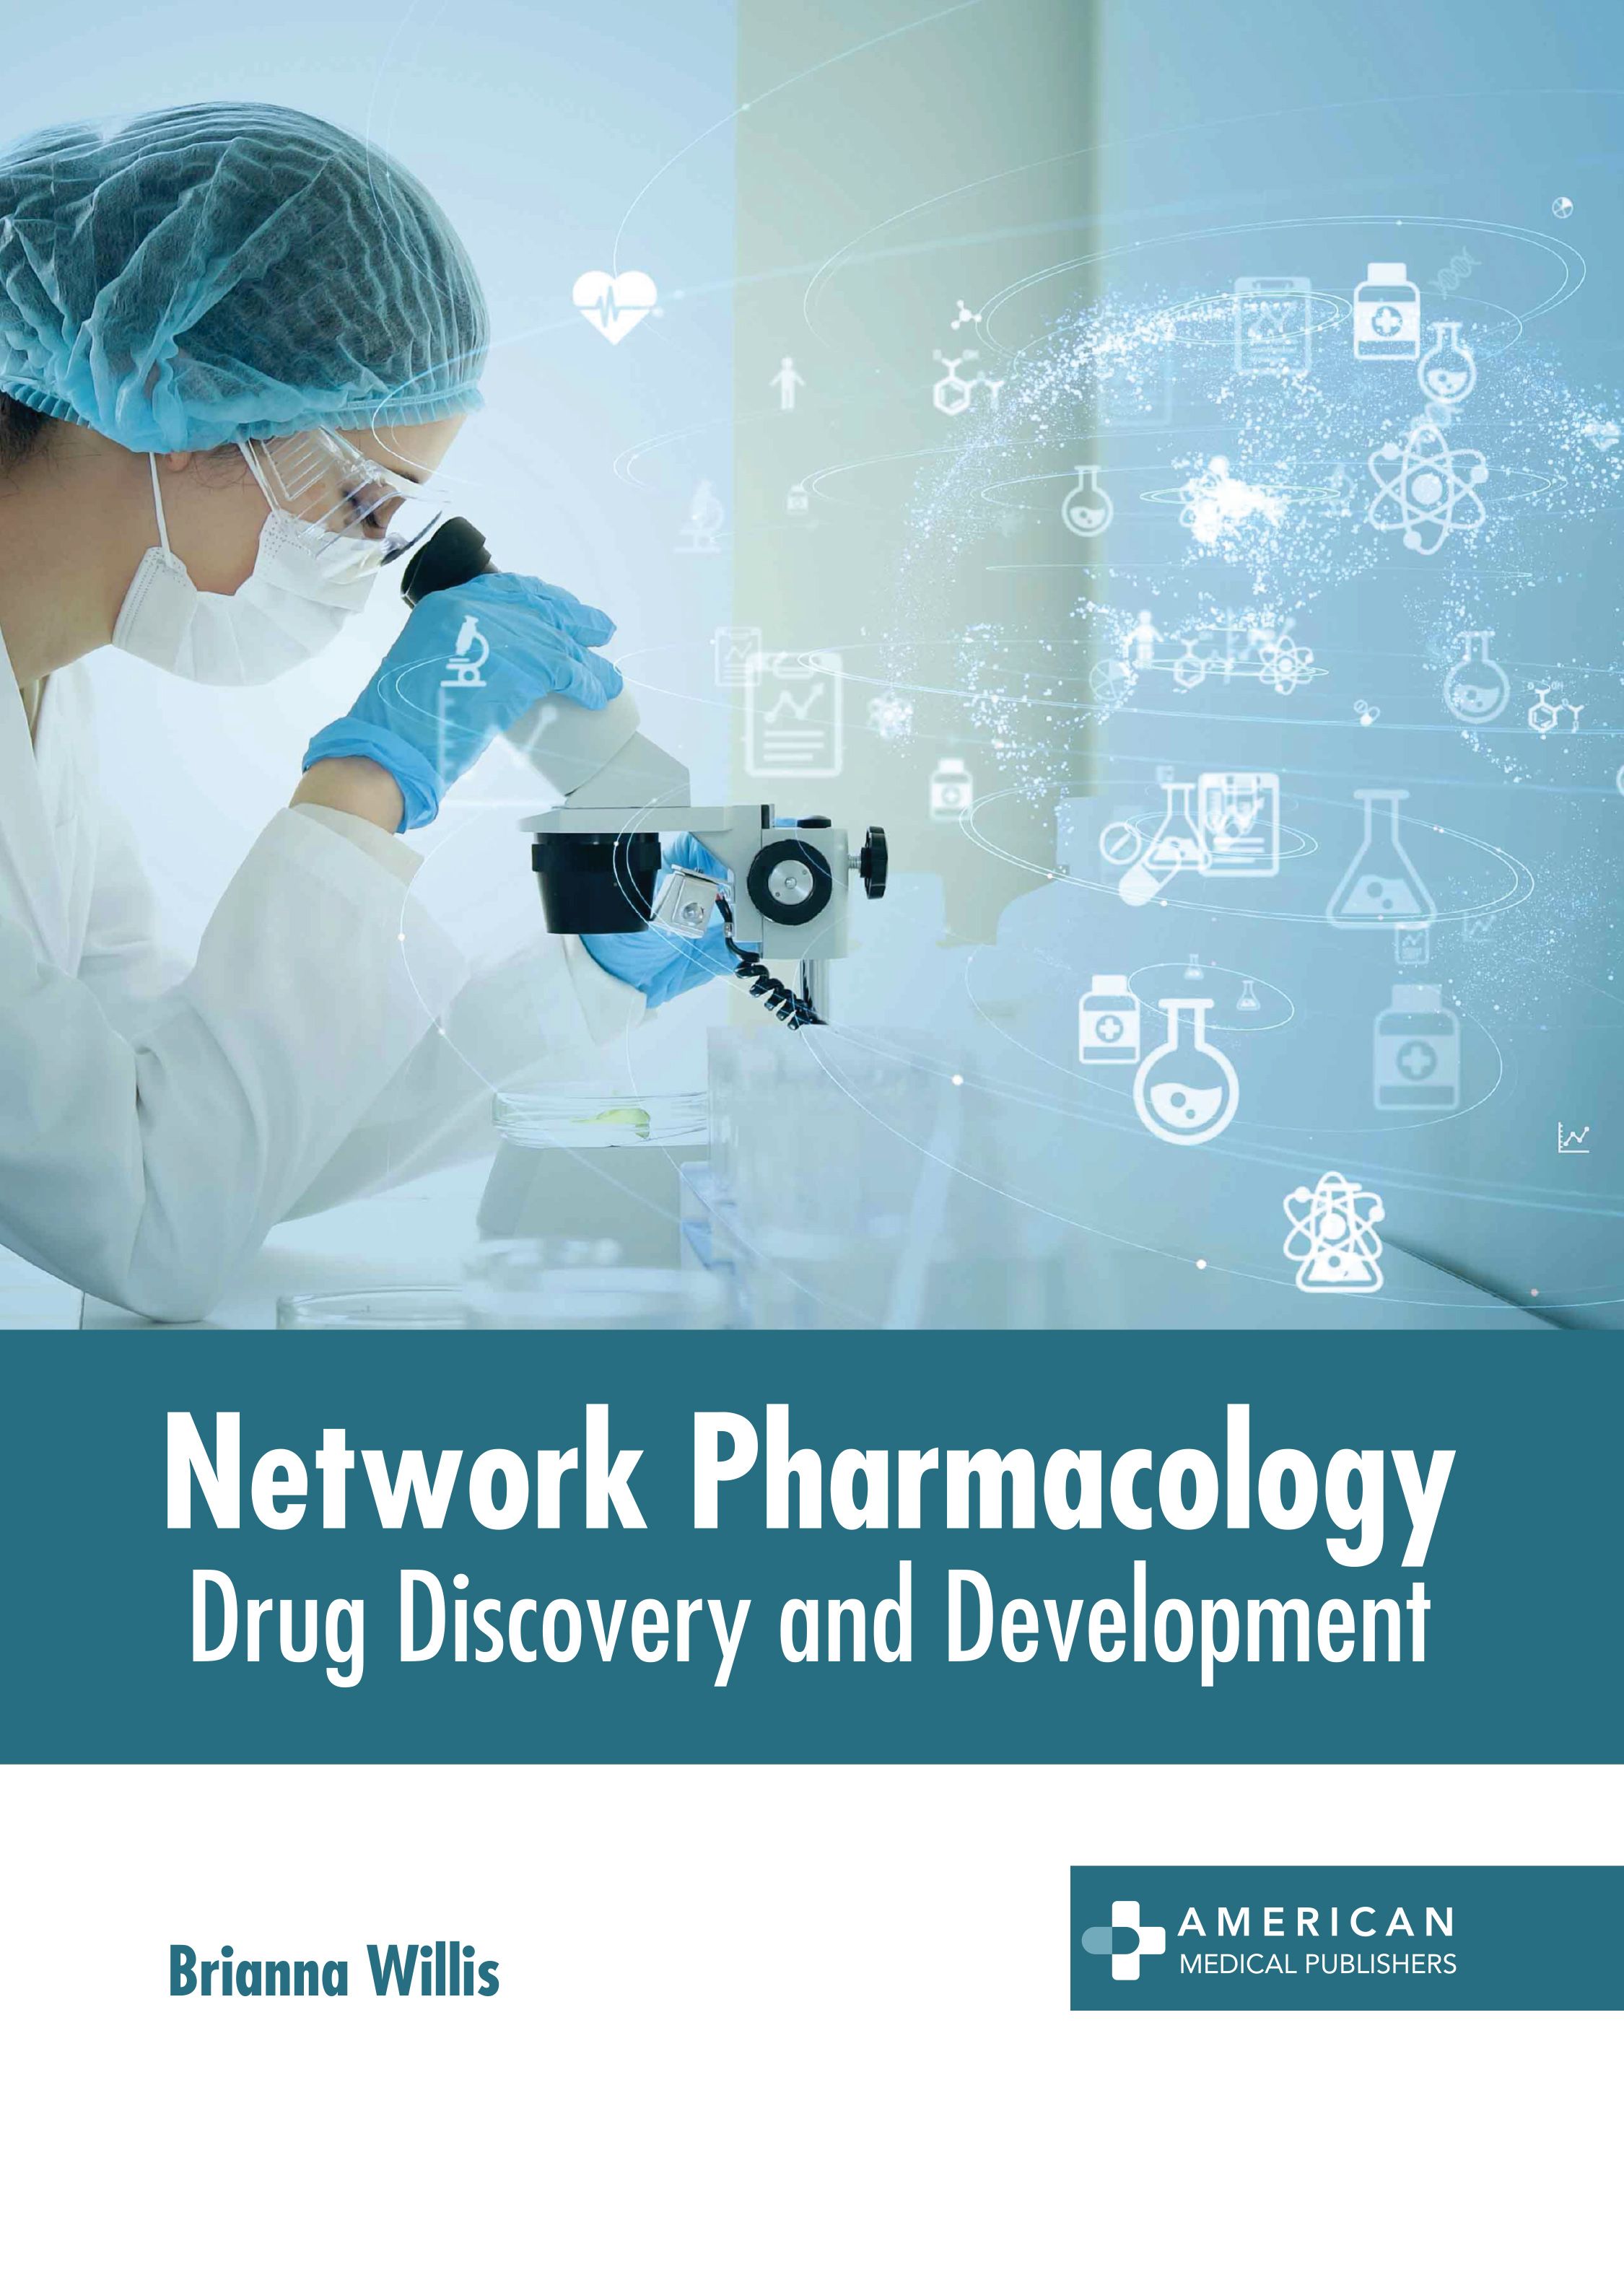 NETWORK PHARMACOLOGY: DRUG DISCOVERY AND DEVELOPMENT